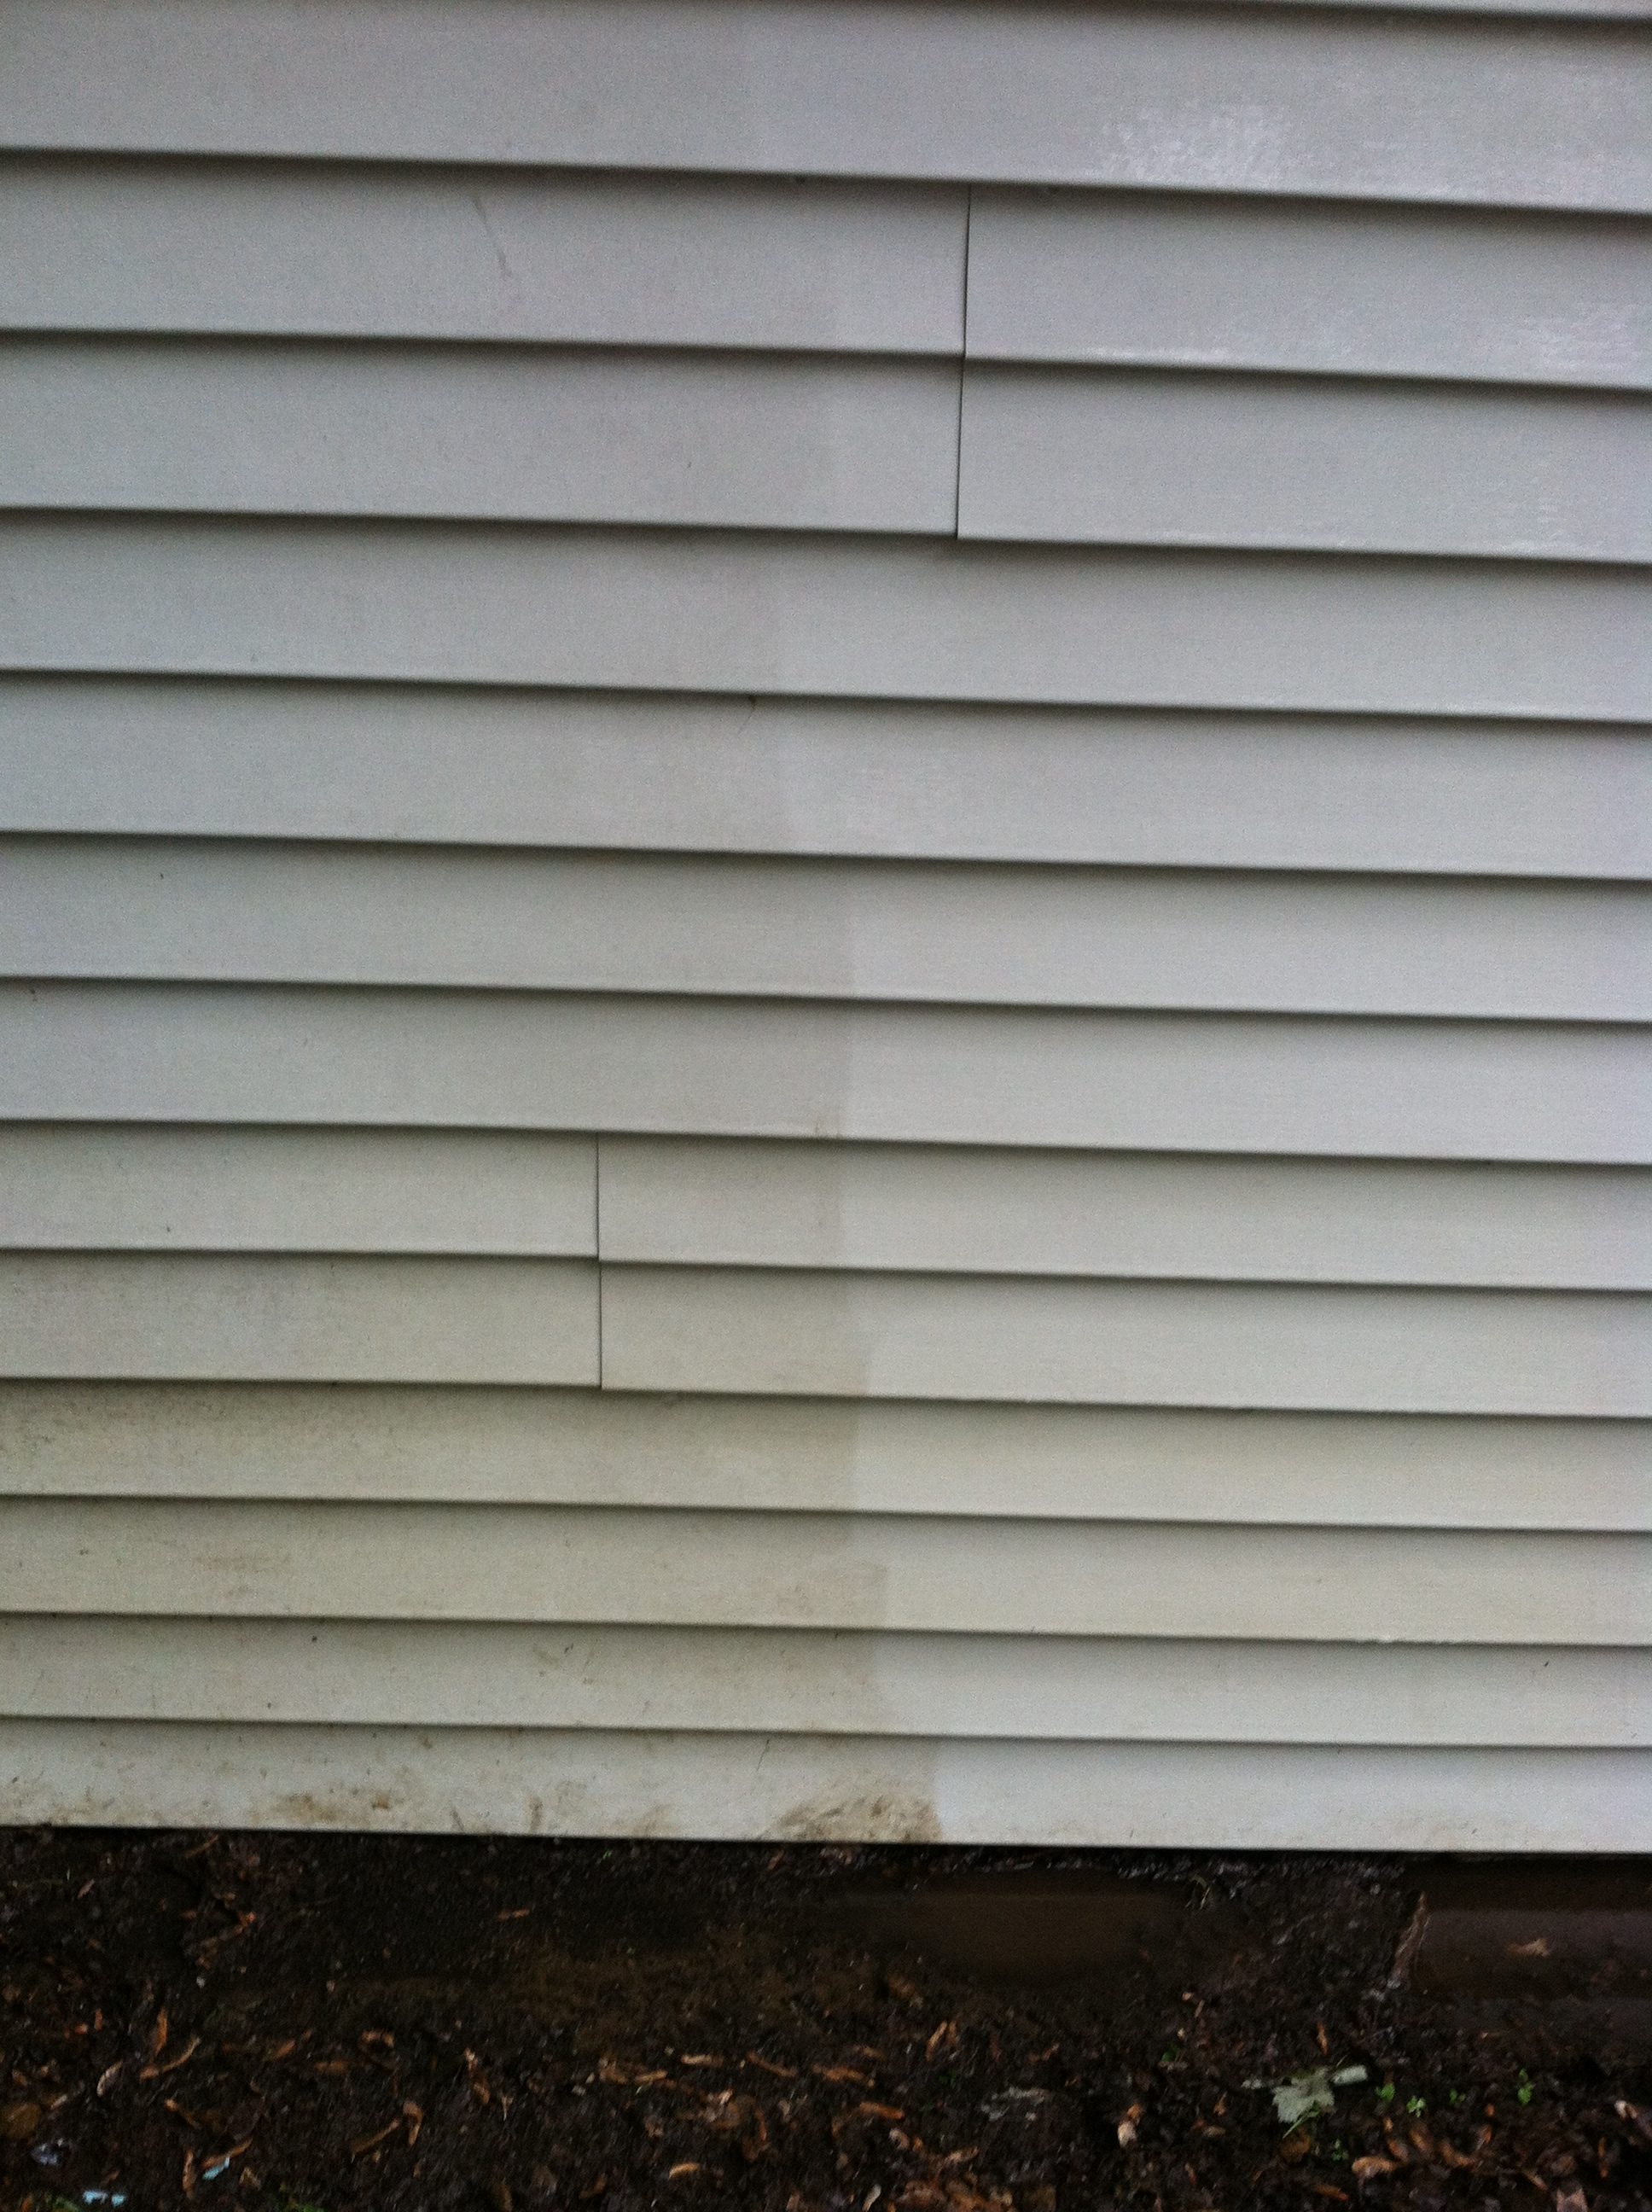 During - Direct Comparison Between Dirty and Clean Vinyl Siding